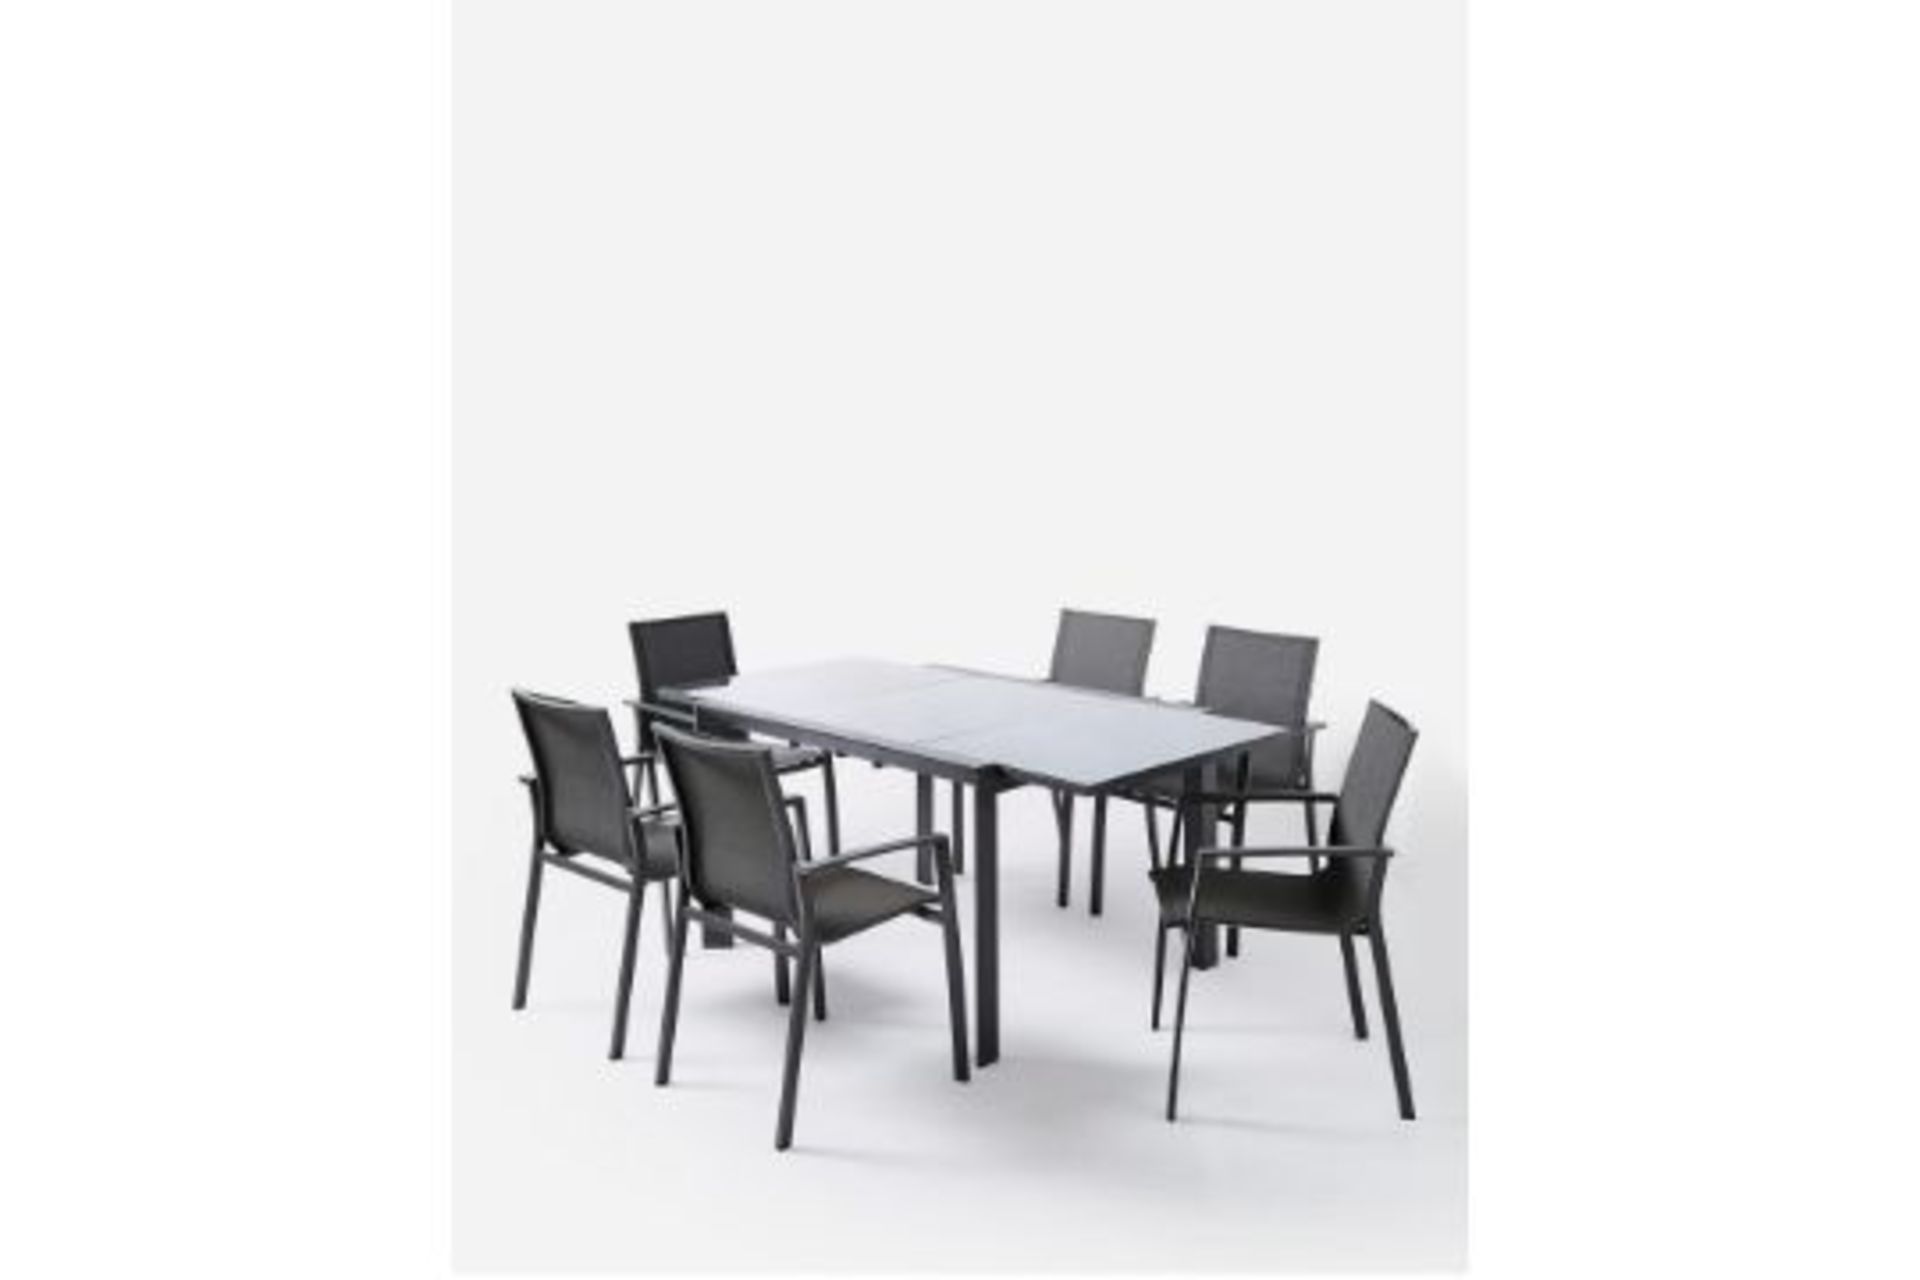 BRAND NEW Oslo 6 Seater Dining Set with Extendable Table. RRP £699 EACH. The Oslo Dining Set with - Image 2 of 2